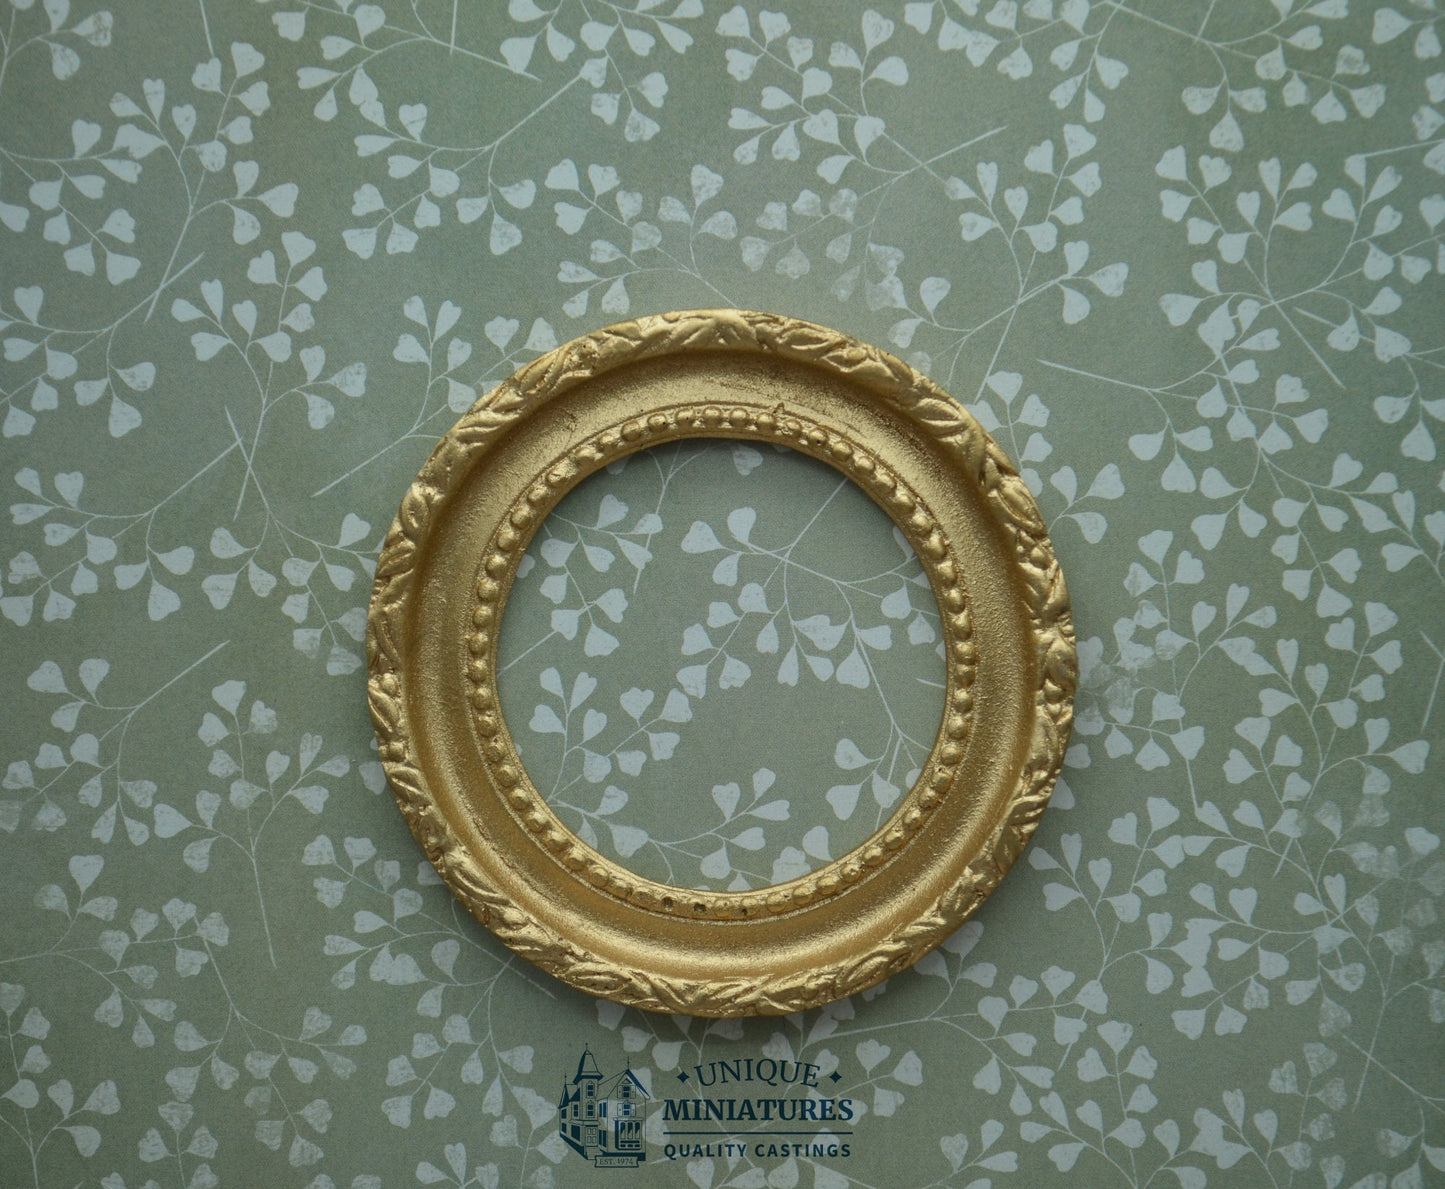 Circular Gold Leaf-Patterned Frame | Miniature for Dollhouses